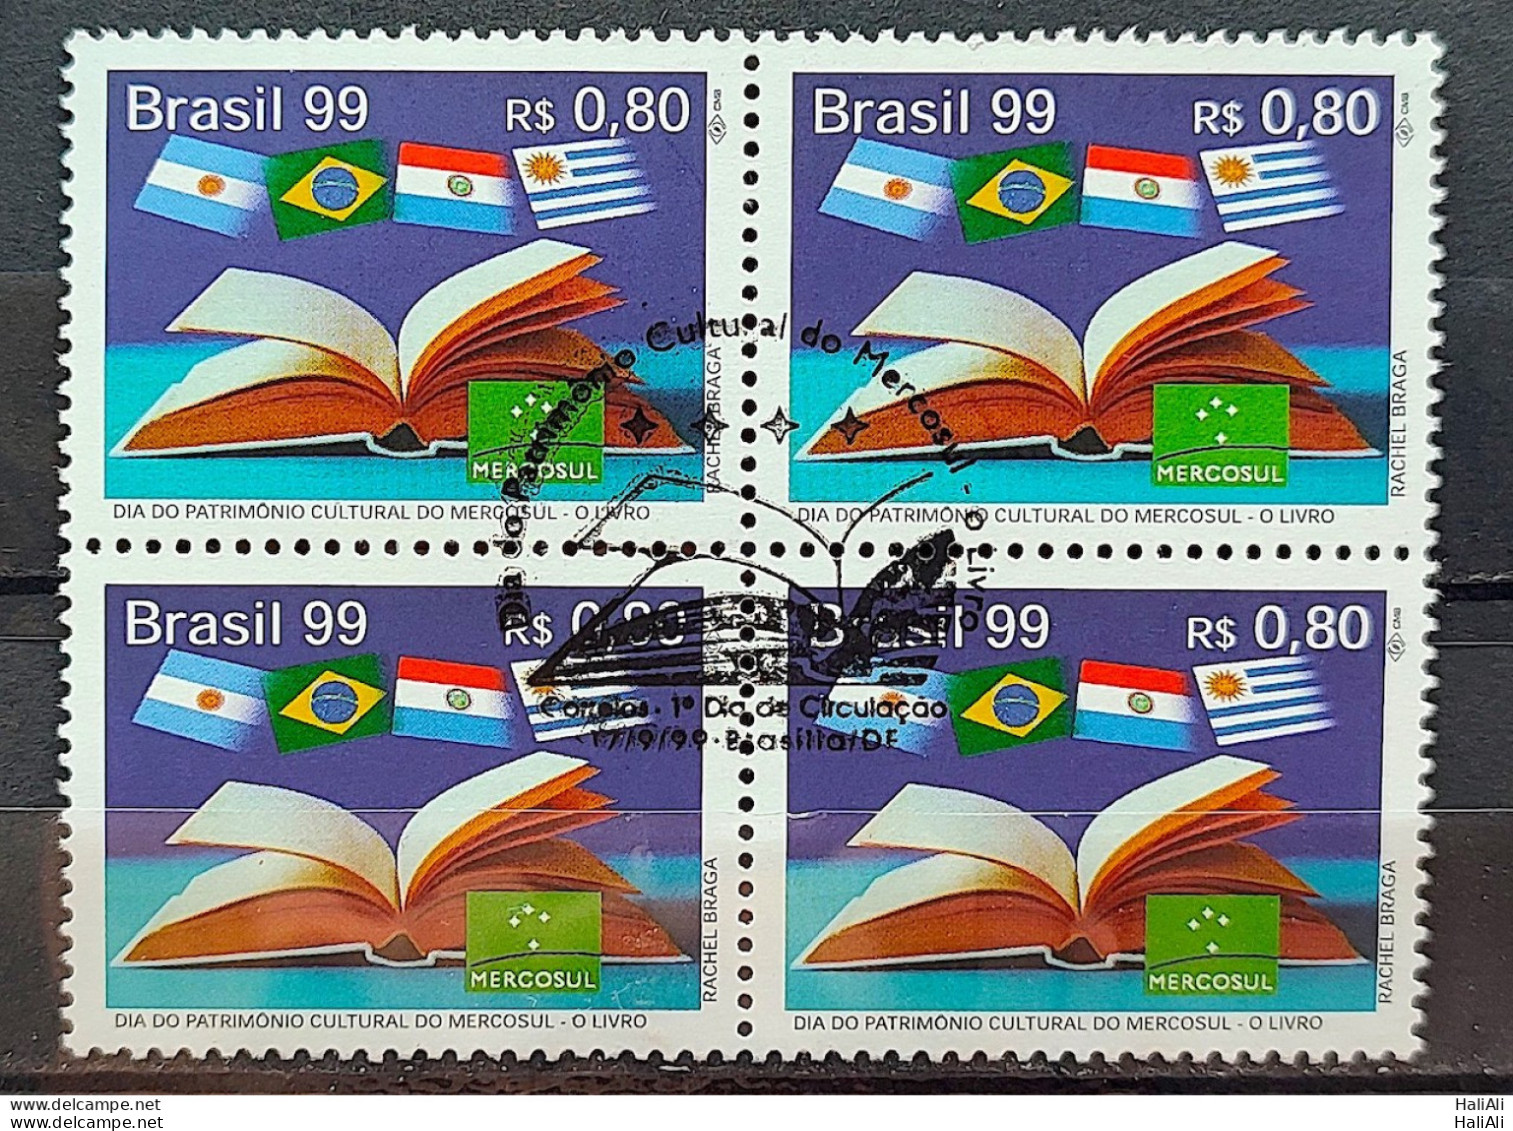 C 2220 Brazil Stamp Cultural Heritage Day Of Mercosur Flag 1999 Block Of 4 CBC DF - Unused Stamps